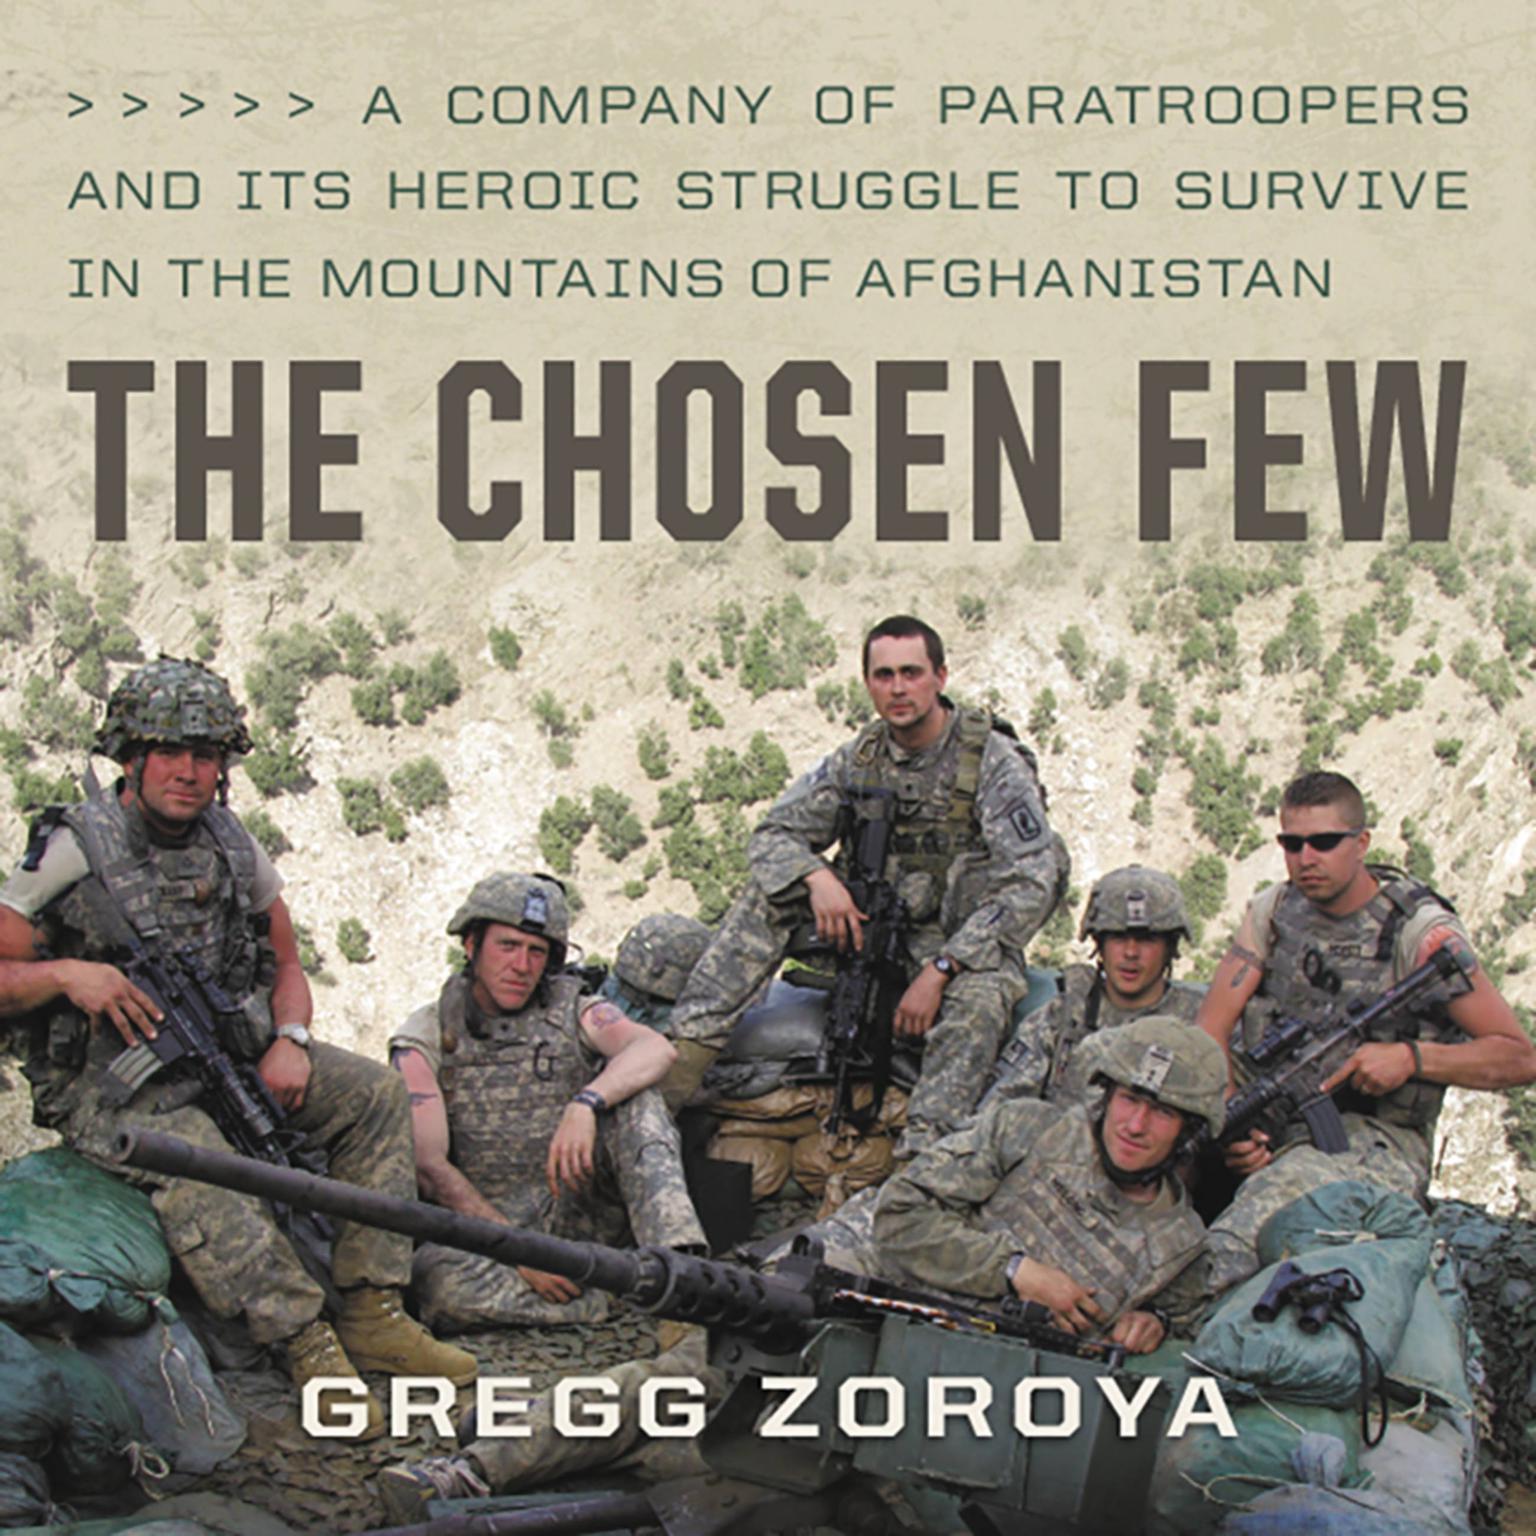 The Chosen Few: A Company of Paratroopers and Its Heroic Struggle to Survive in the Mountains of Afghanistan Audiobook, by Gregg Zoroya